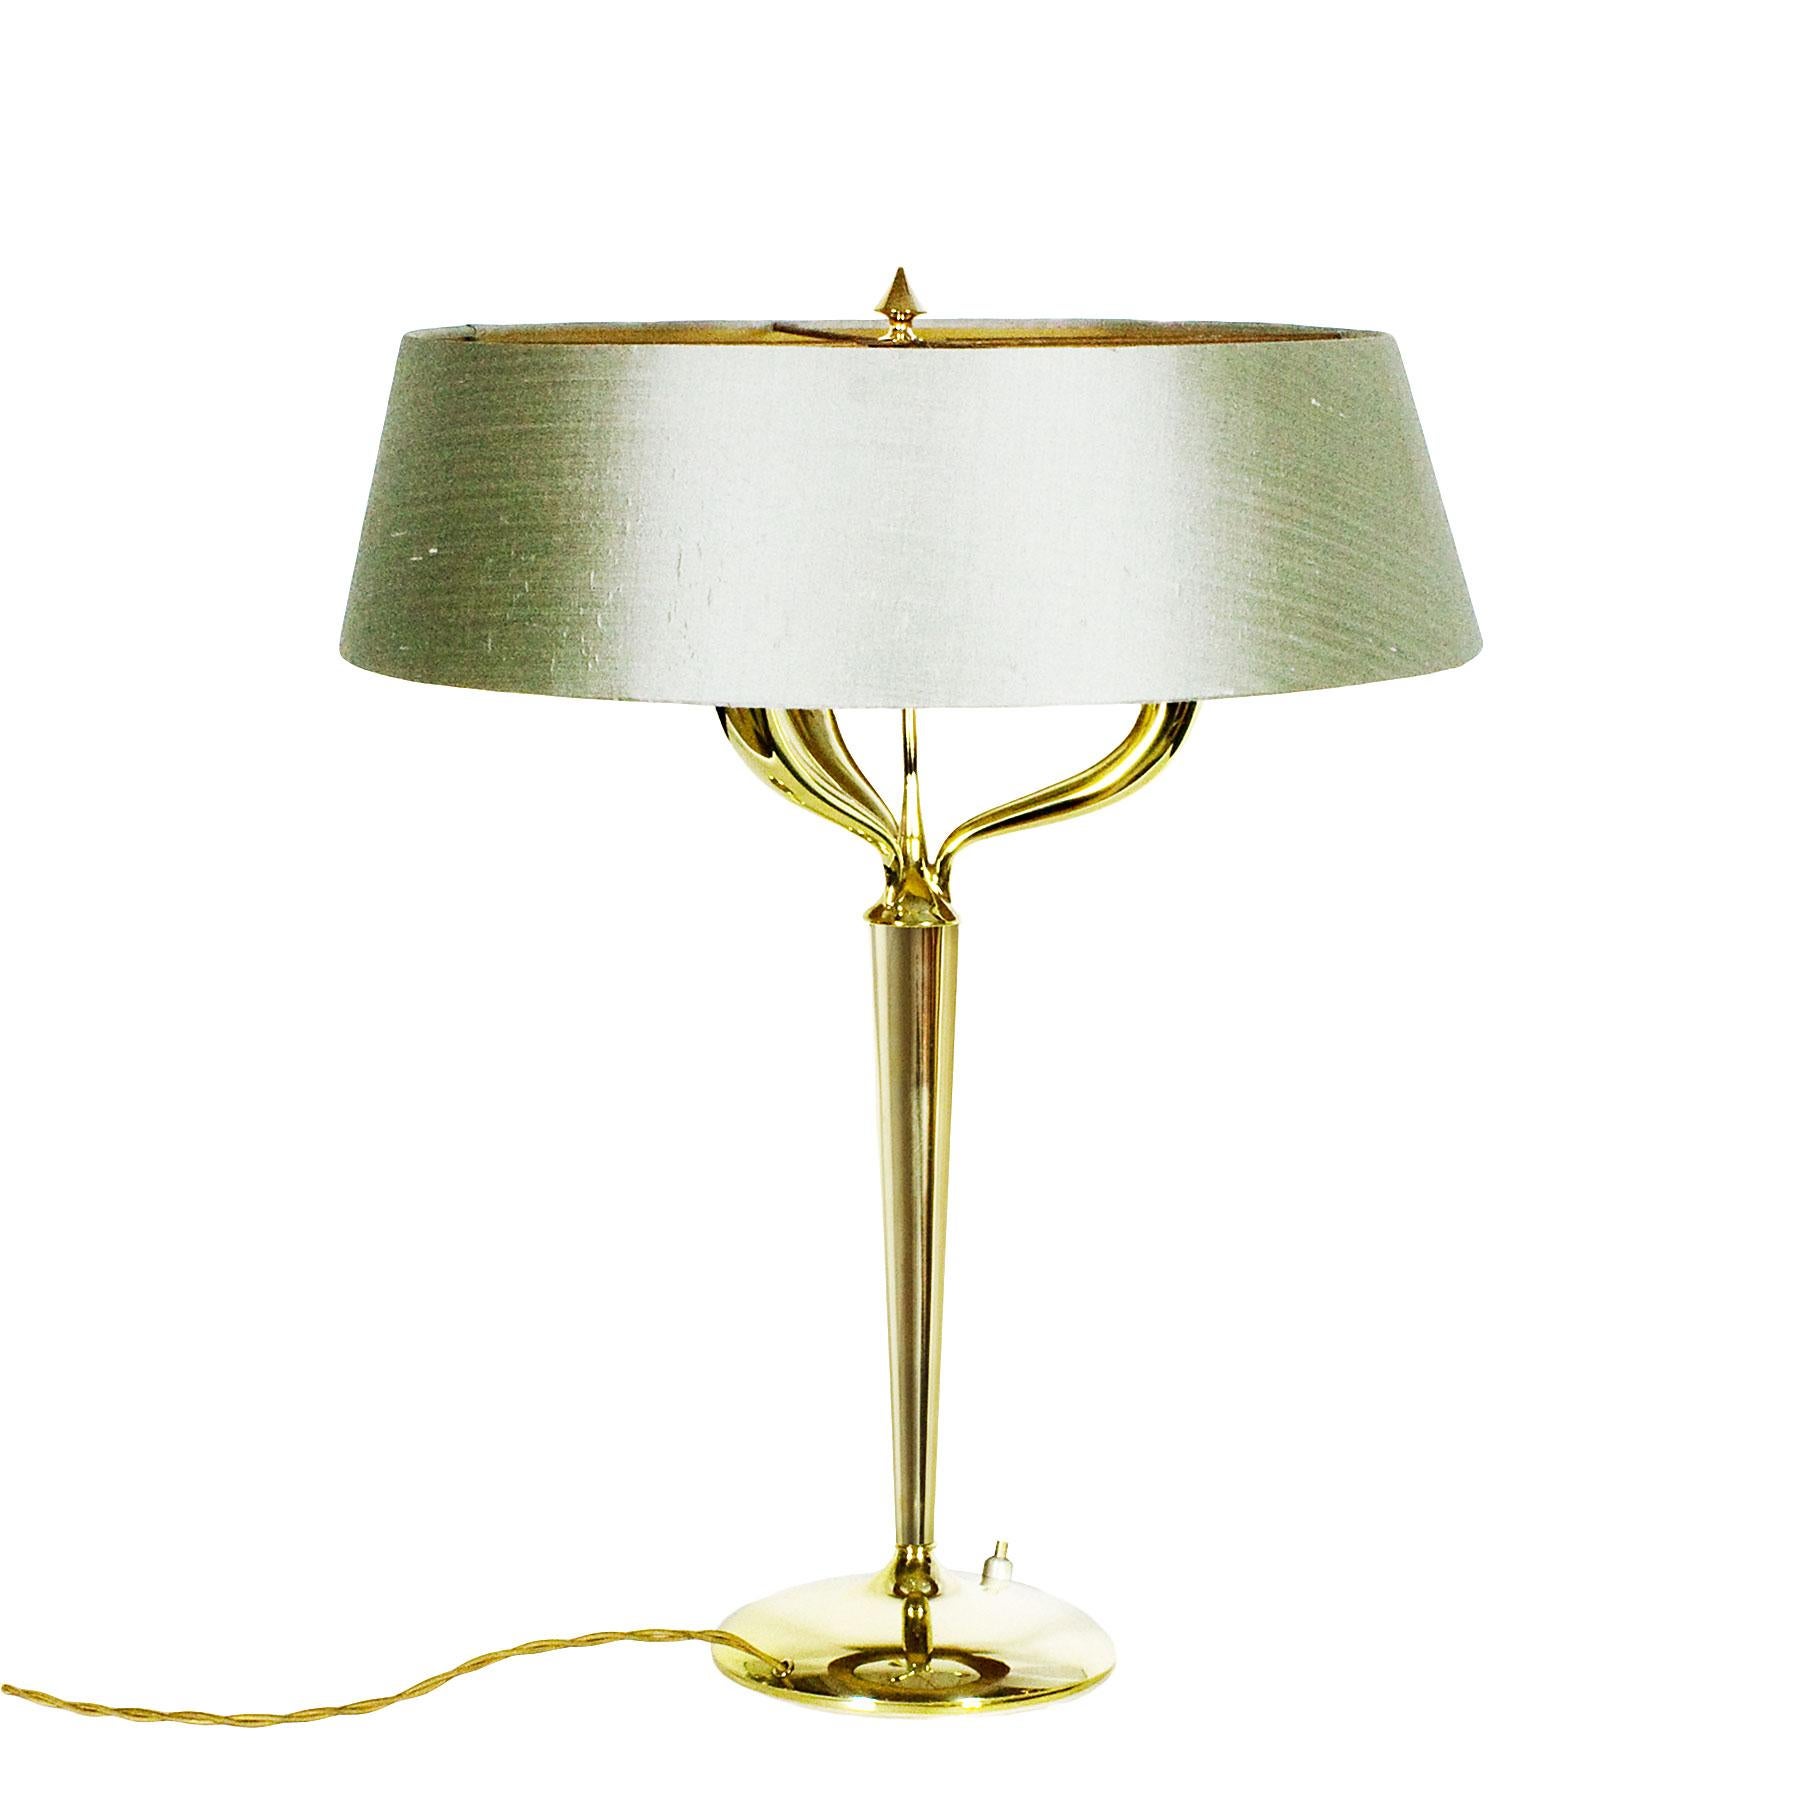 Large table lamp with three branches in polished brass, new green almond silk lampshade.

Italy, circa 1950.